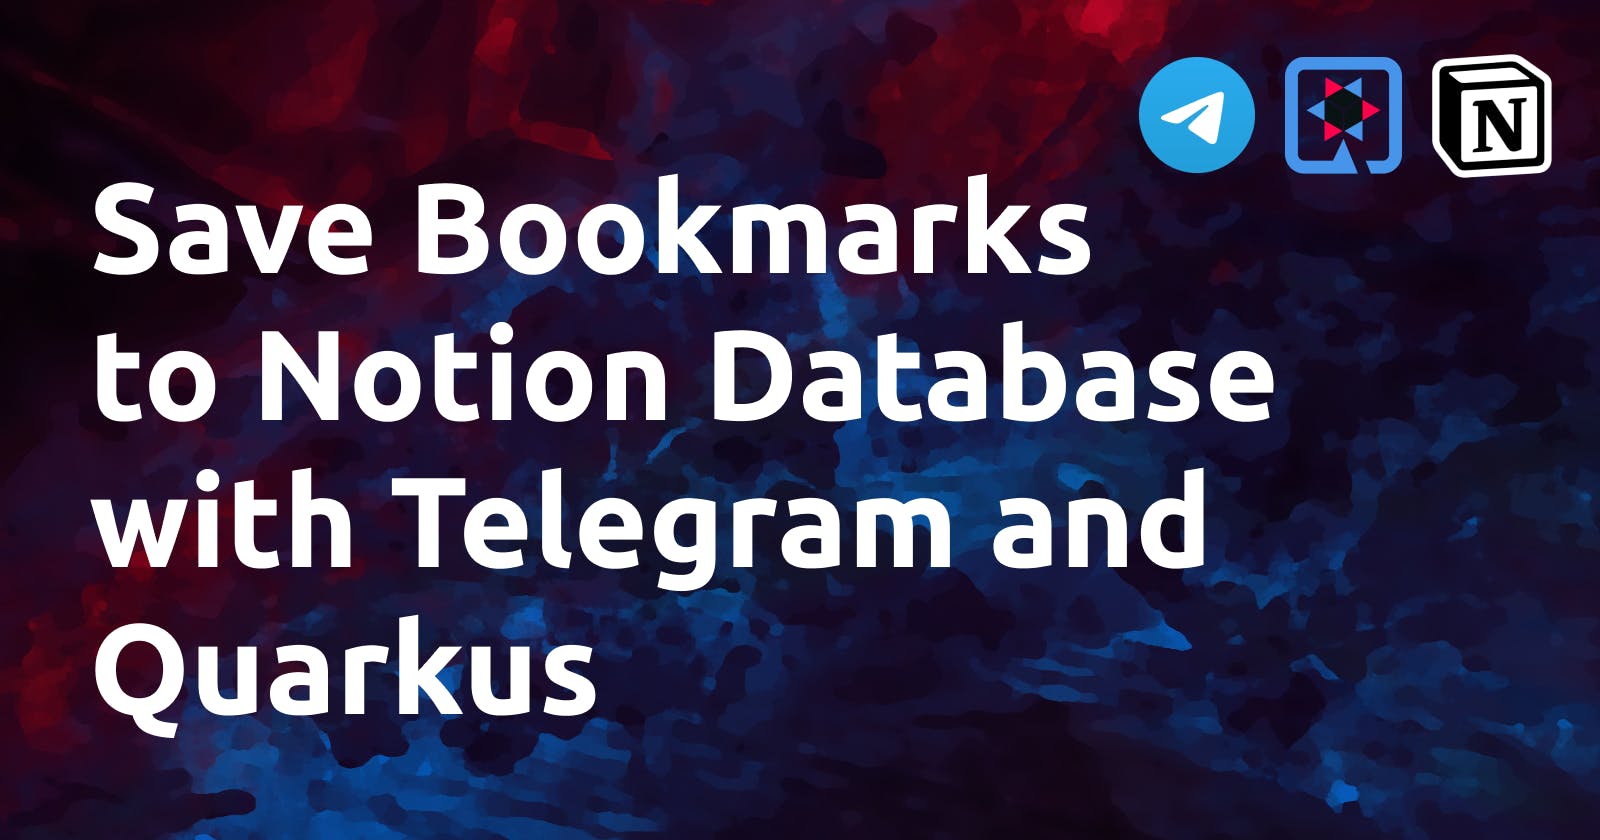 Save Bookmarks to Notion Database with Telegram and Quarkus